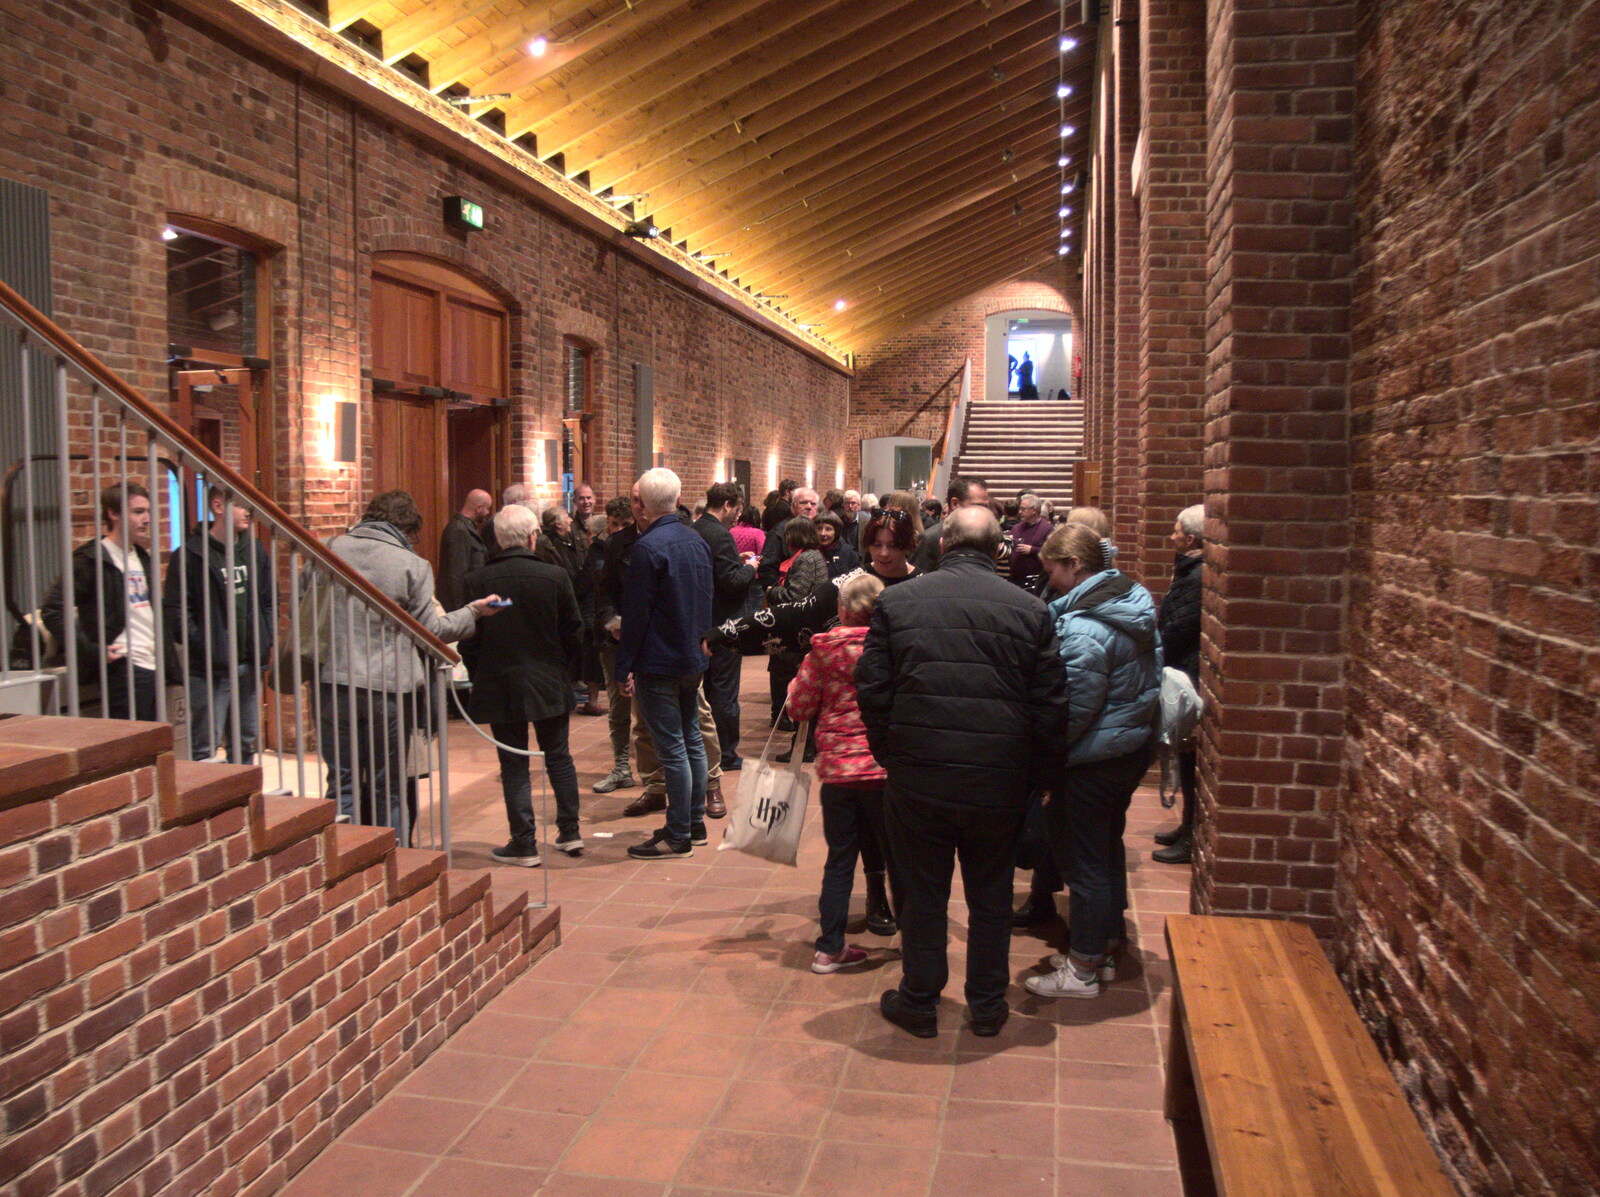 Crowds mingle before the performance from Fred and the Orchestra, Snape Maltings, Suffolk - 5th April